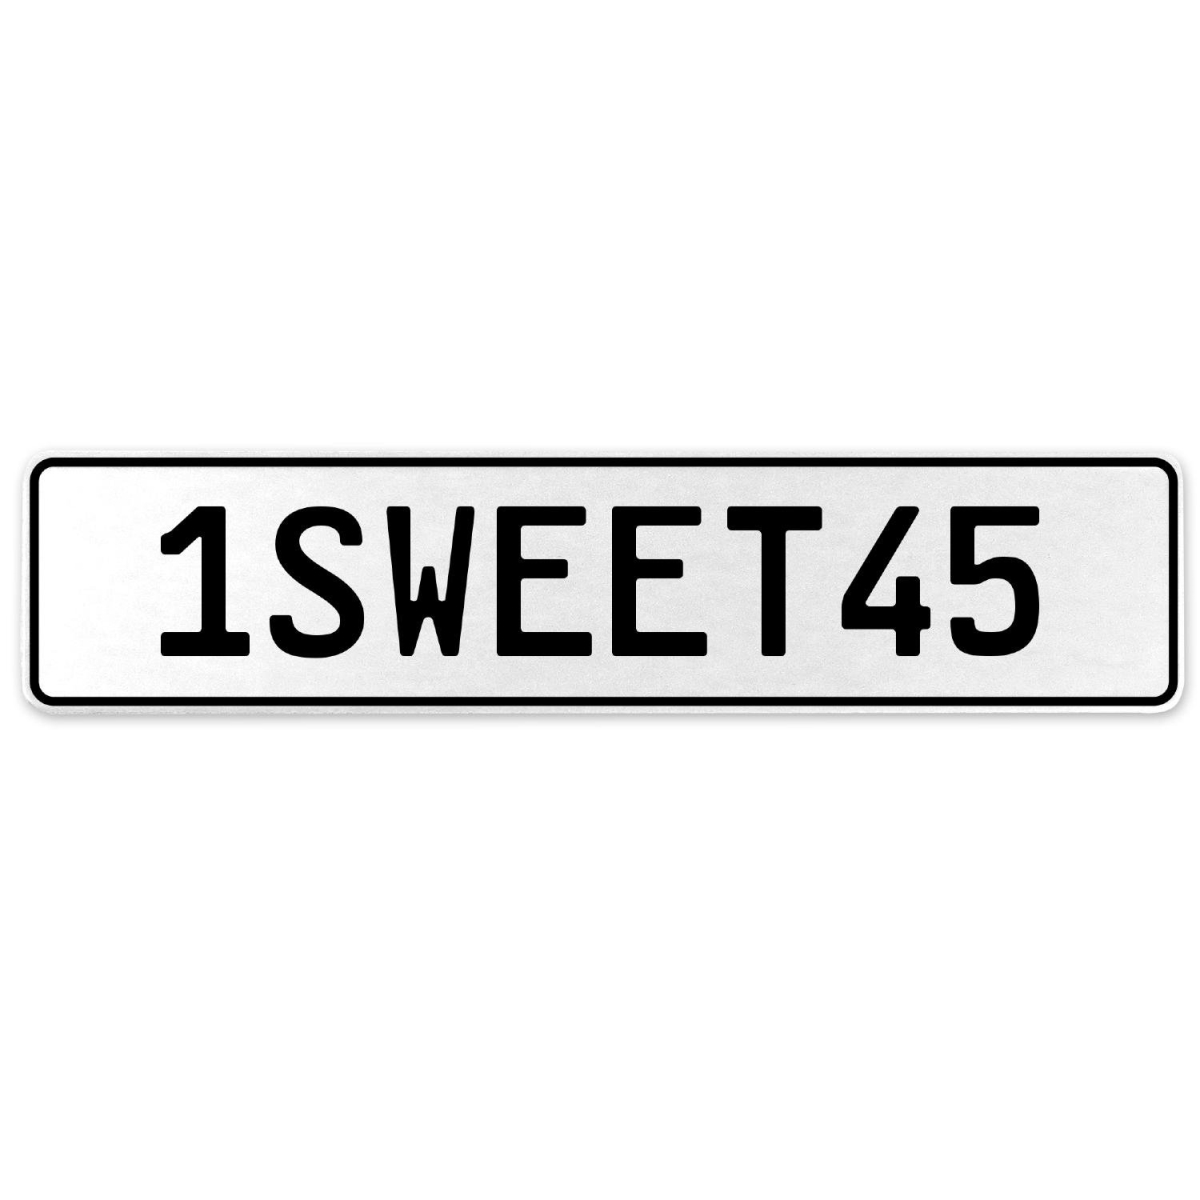 554246 1sweet45 - White Aluminum Street Sign Mancave Euro Plate Name Door Sign Wall